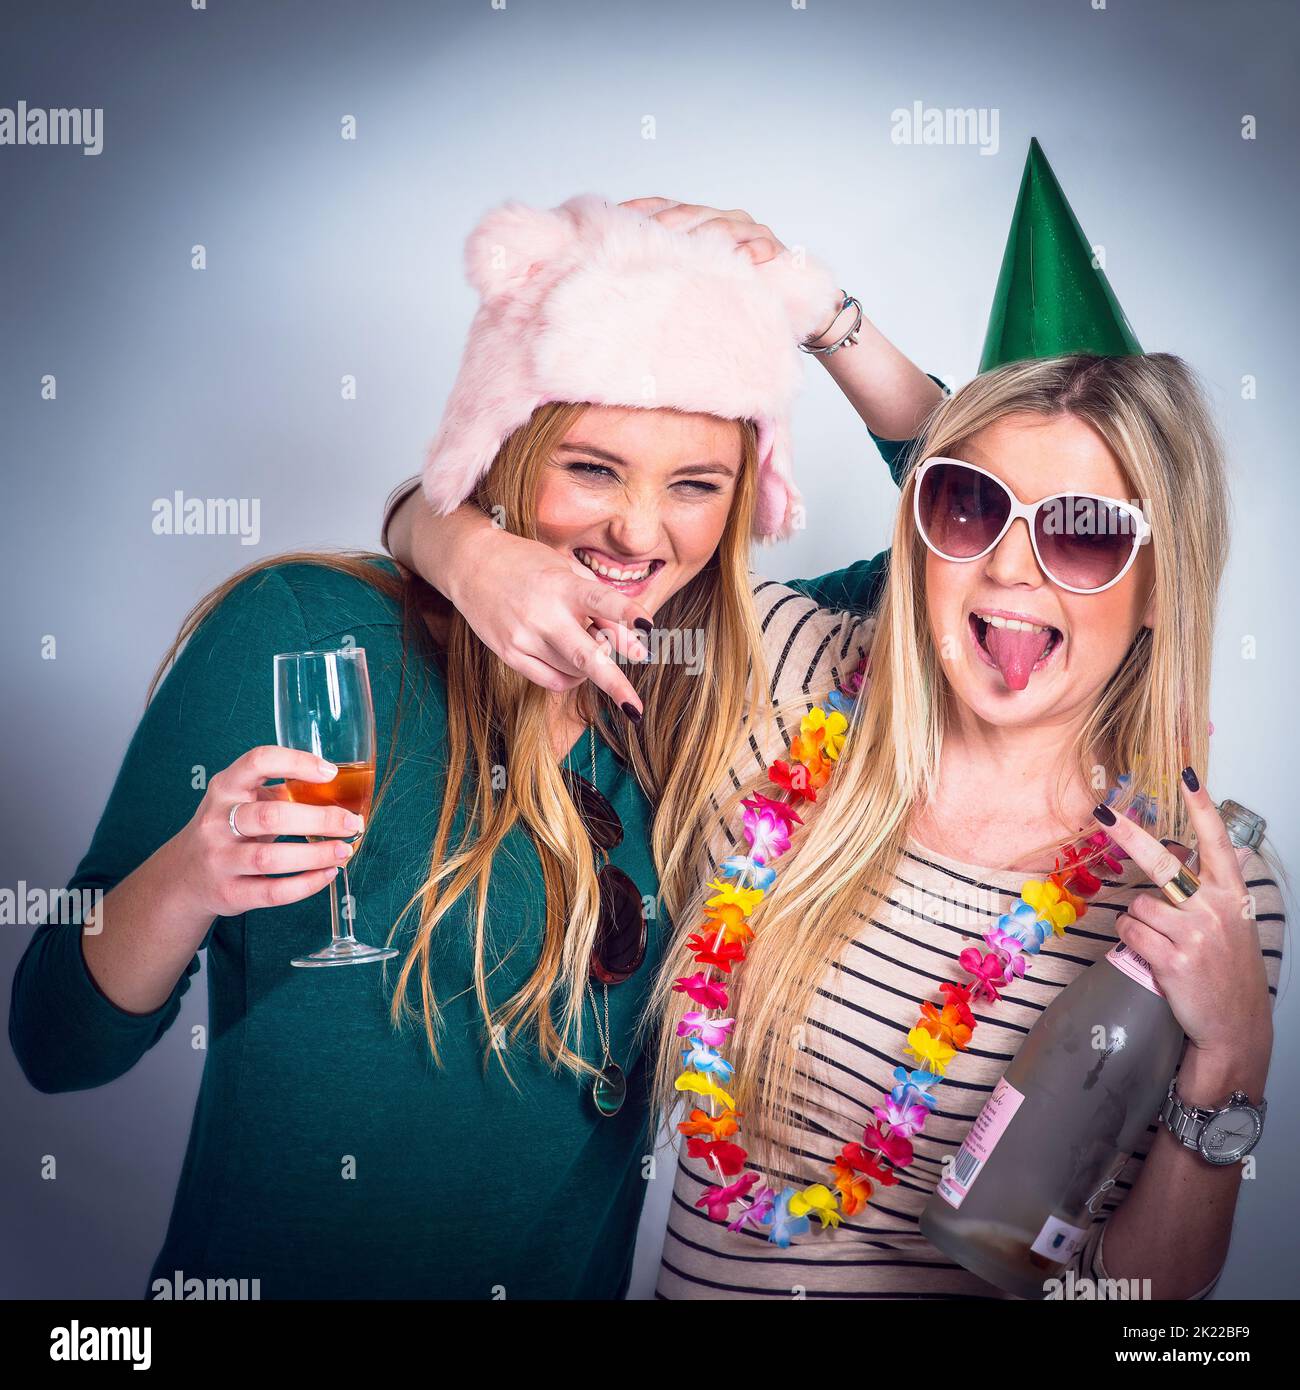 You drink too much, swear too much and have crazy morals...youre everything Ive ever wanted in a friend. Real party of guys and girls getting drunk. Stock Photo